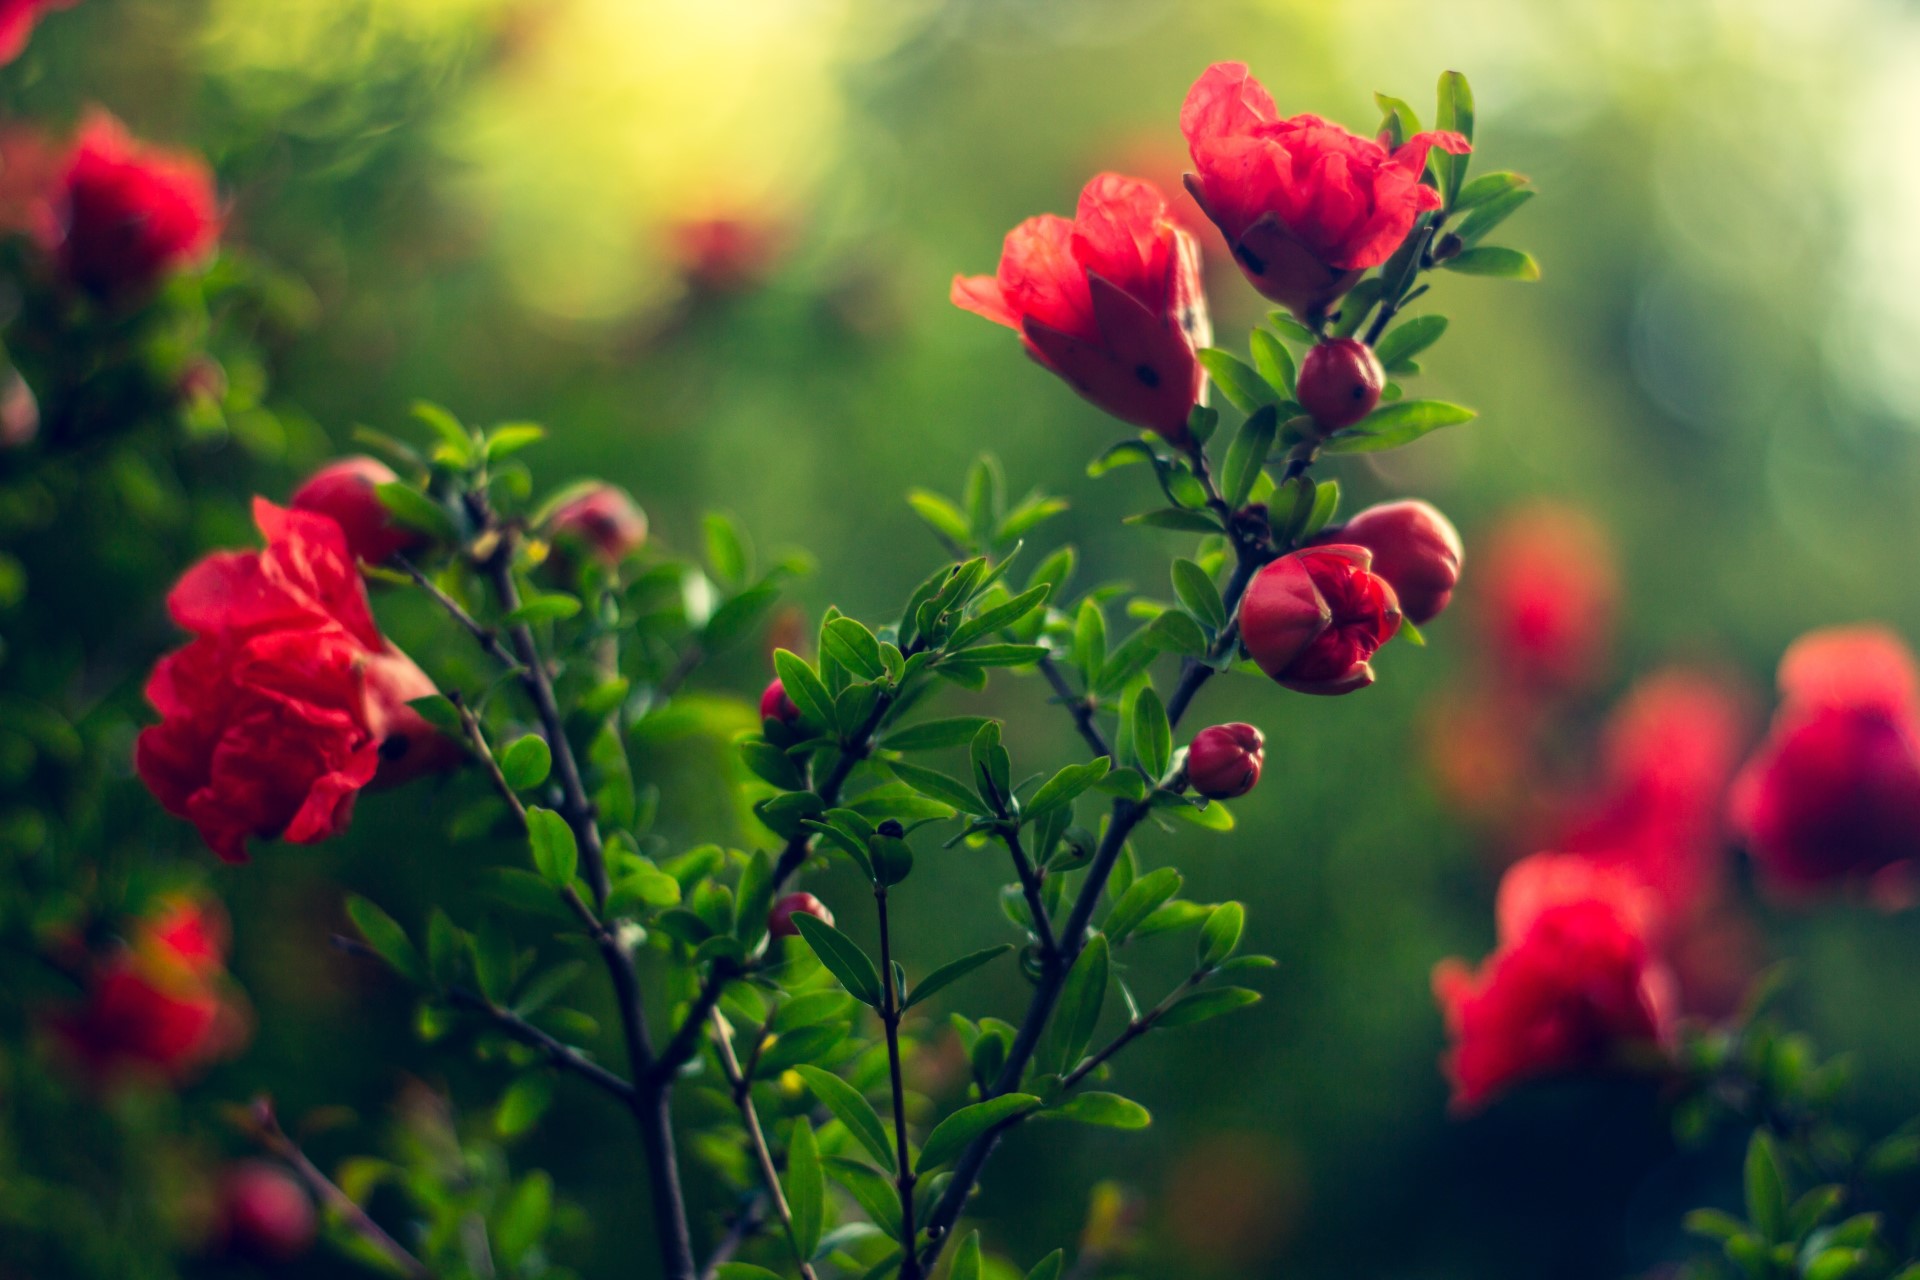 colorful, Flowers, Plants, Green, Blurred, Nature Wallpaper